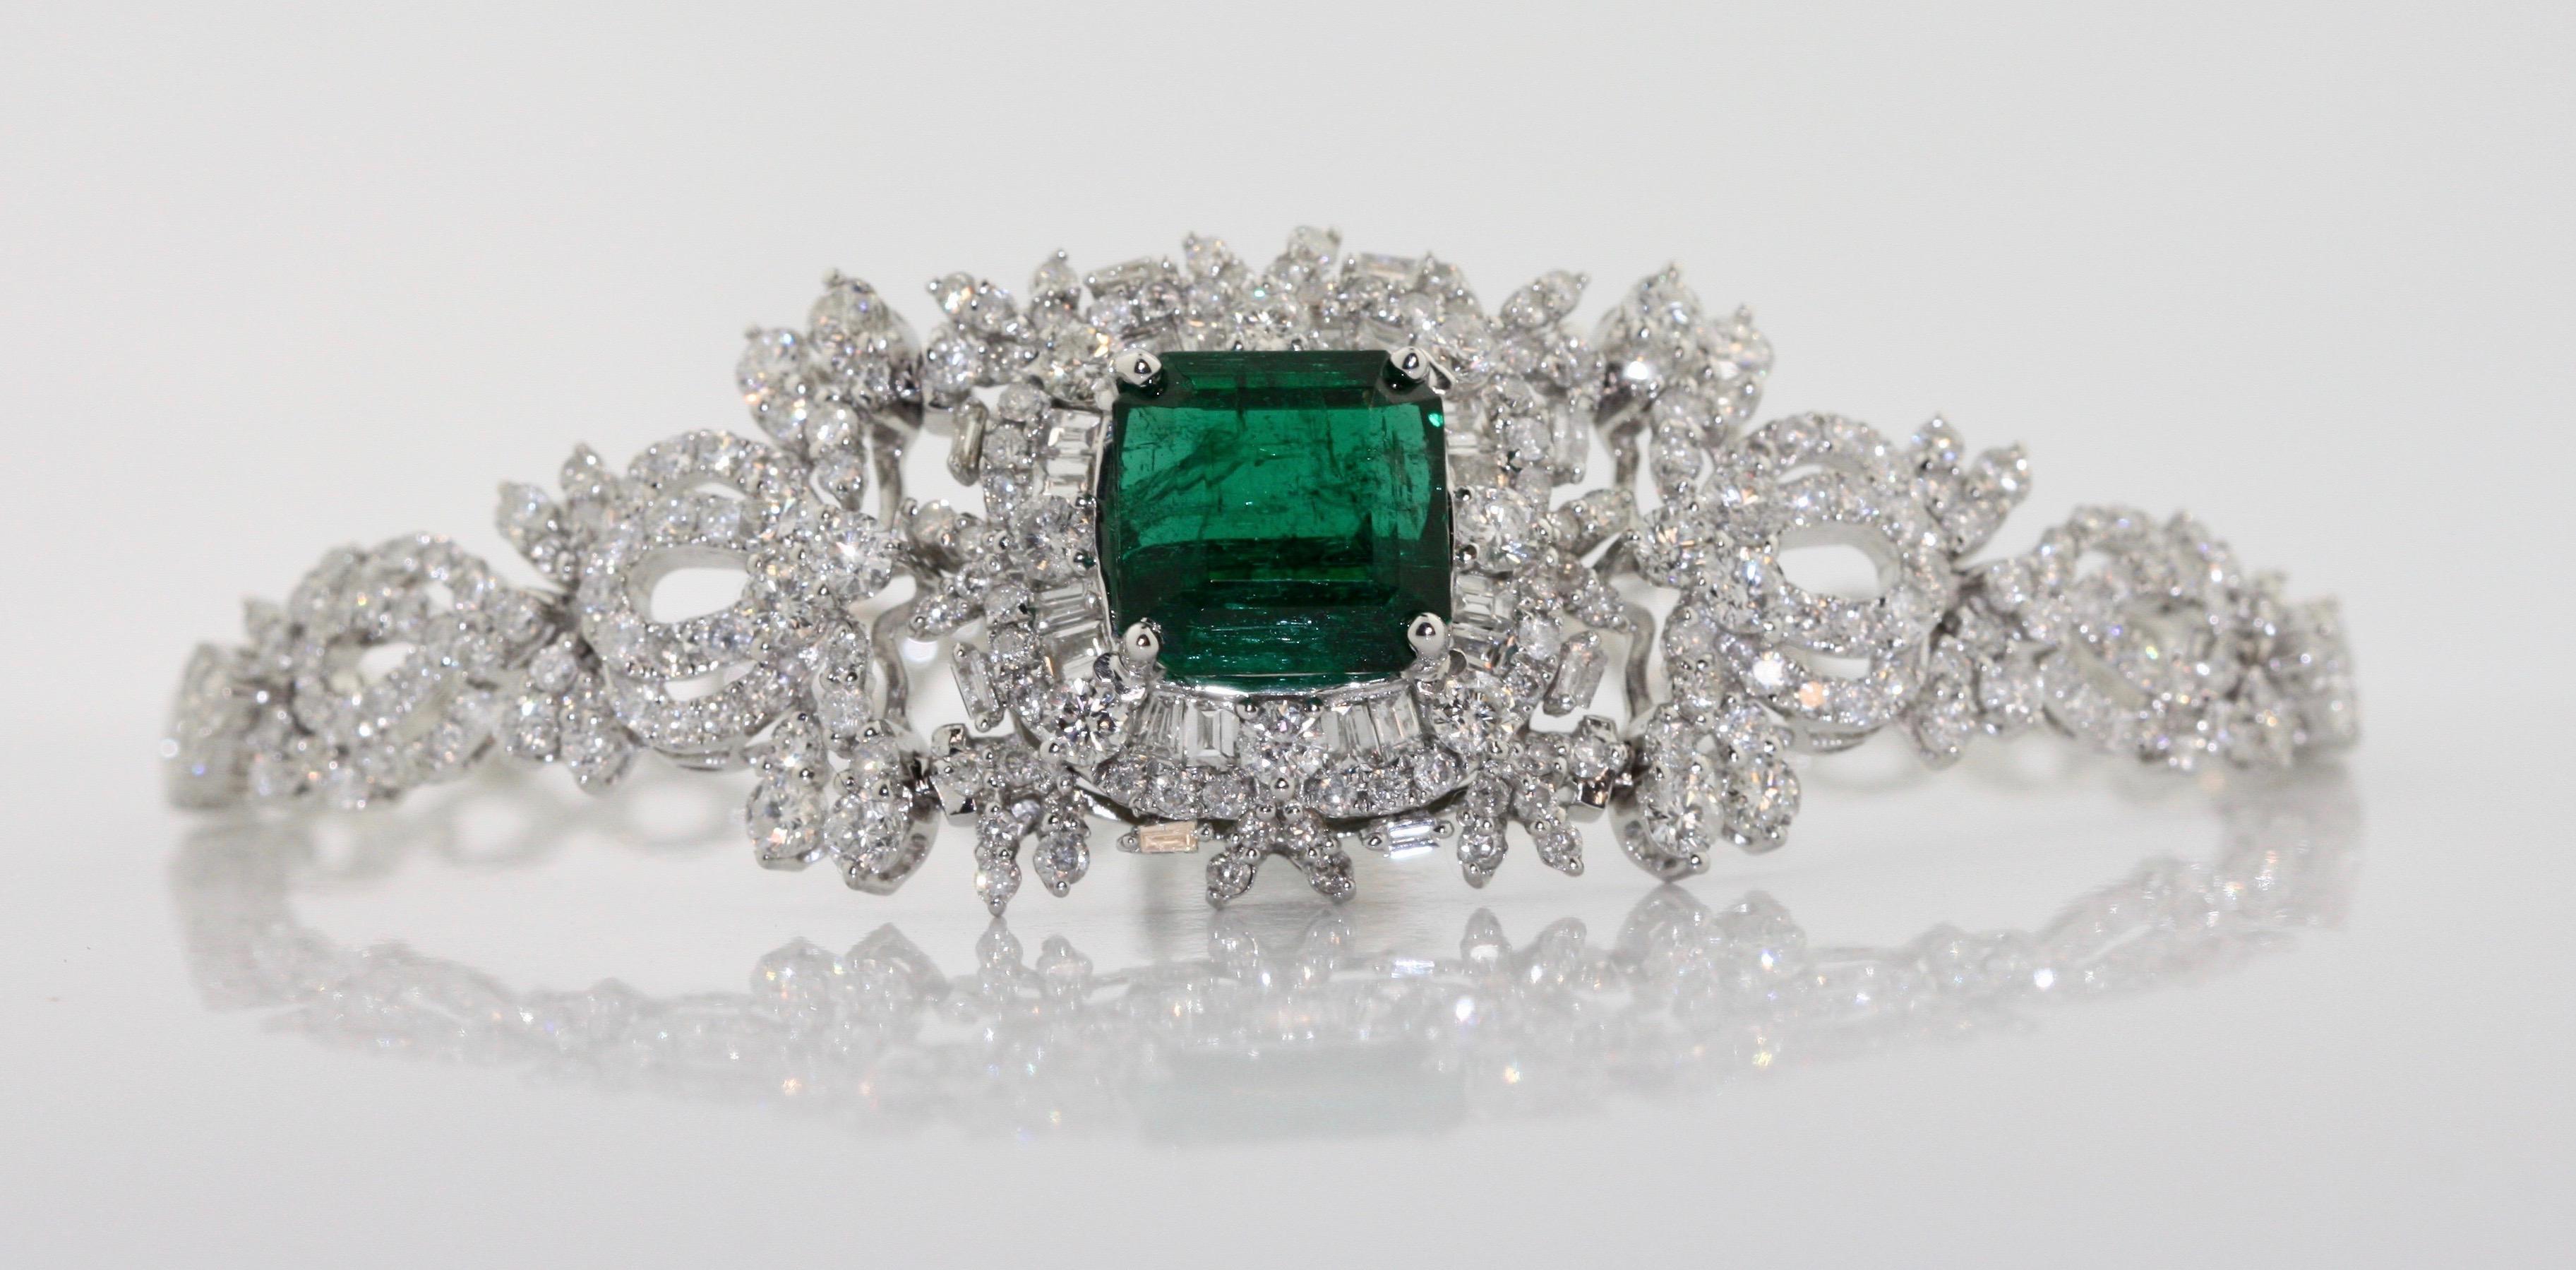 Emerald and Diamond Bracelet 
centered by an octagonal cut emerald weighing 6.44 carats,
diamonds weighing approximately 5.32 carats mounted in 18 karat white gold 
21.8 grams (gross) 
length 7 inches; 
Emerald and Diamond bracelet 
Octagonal Shape,